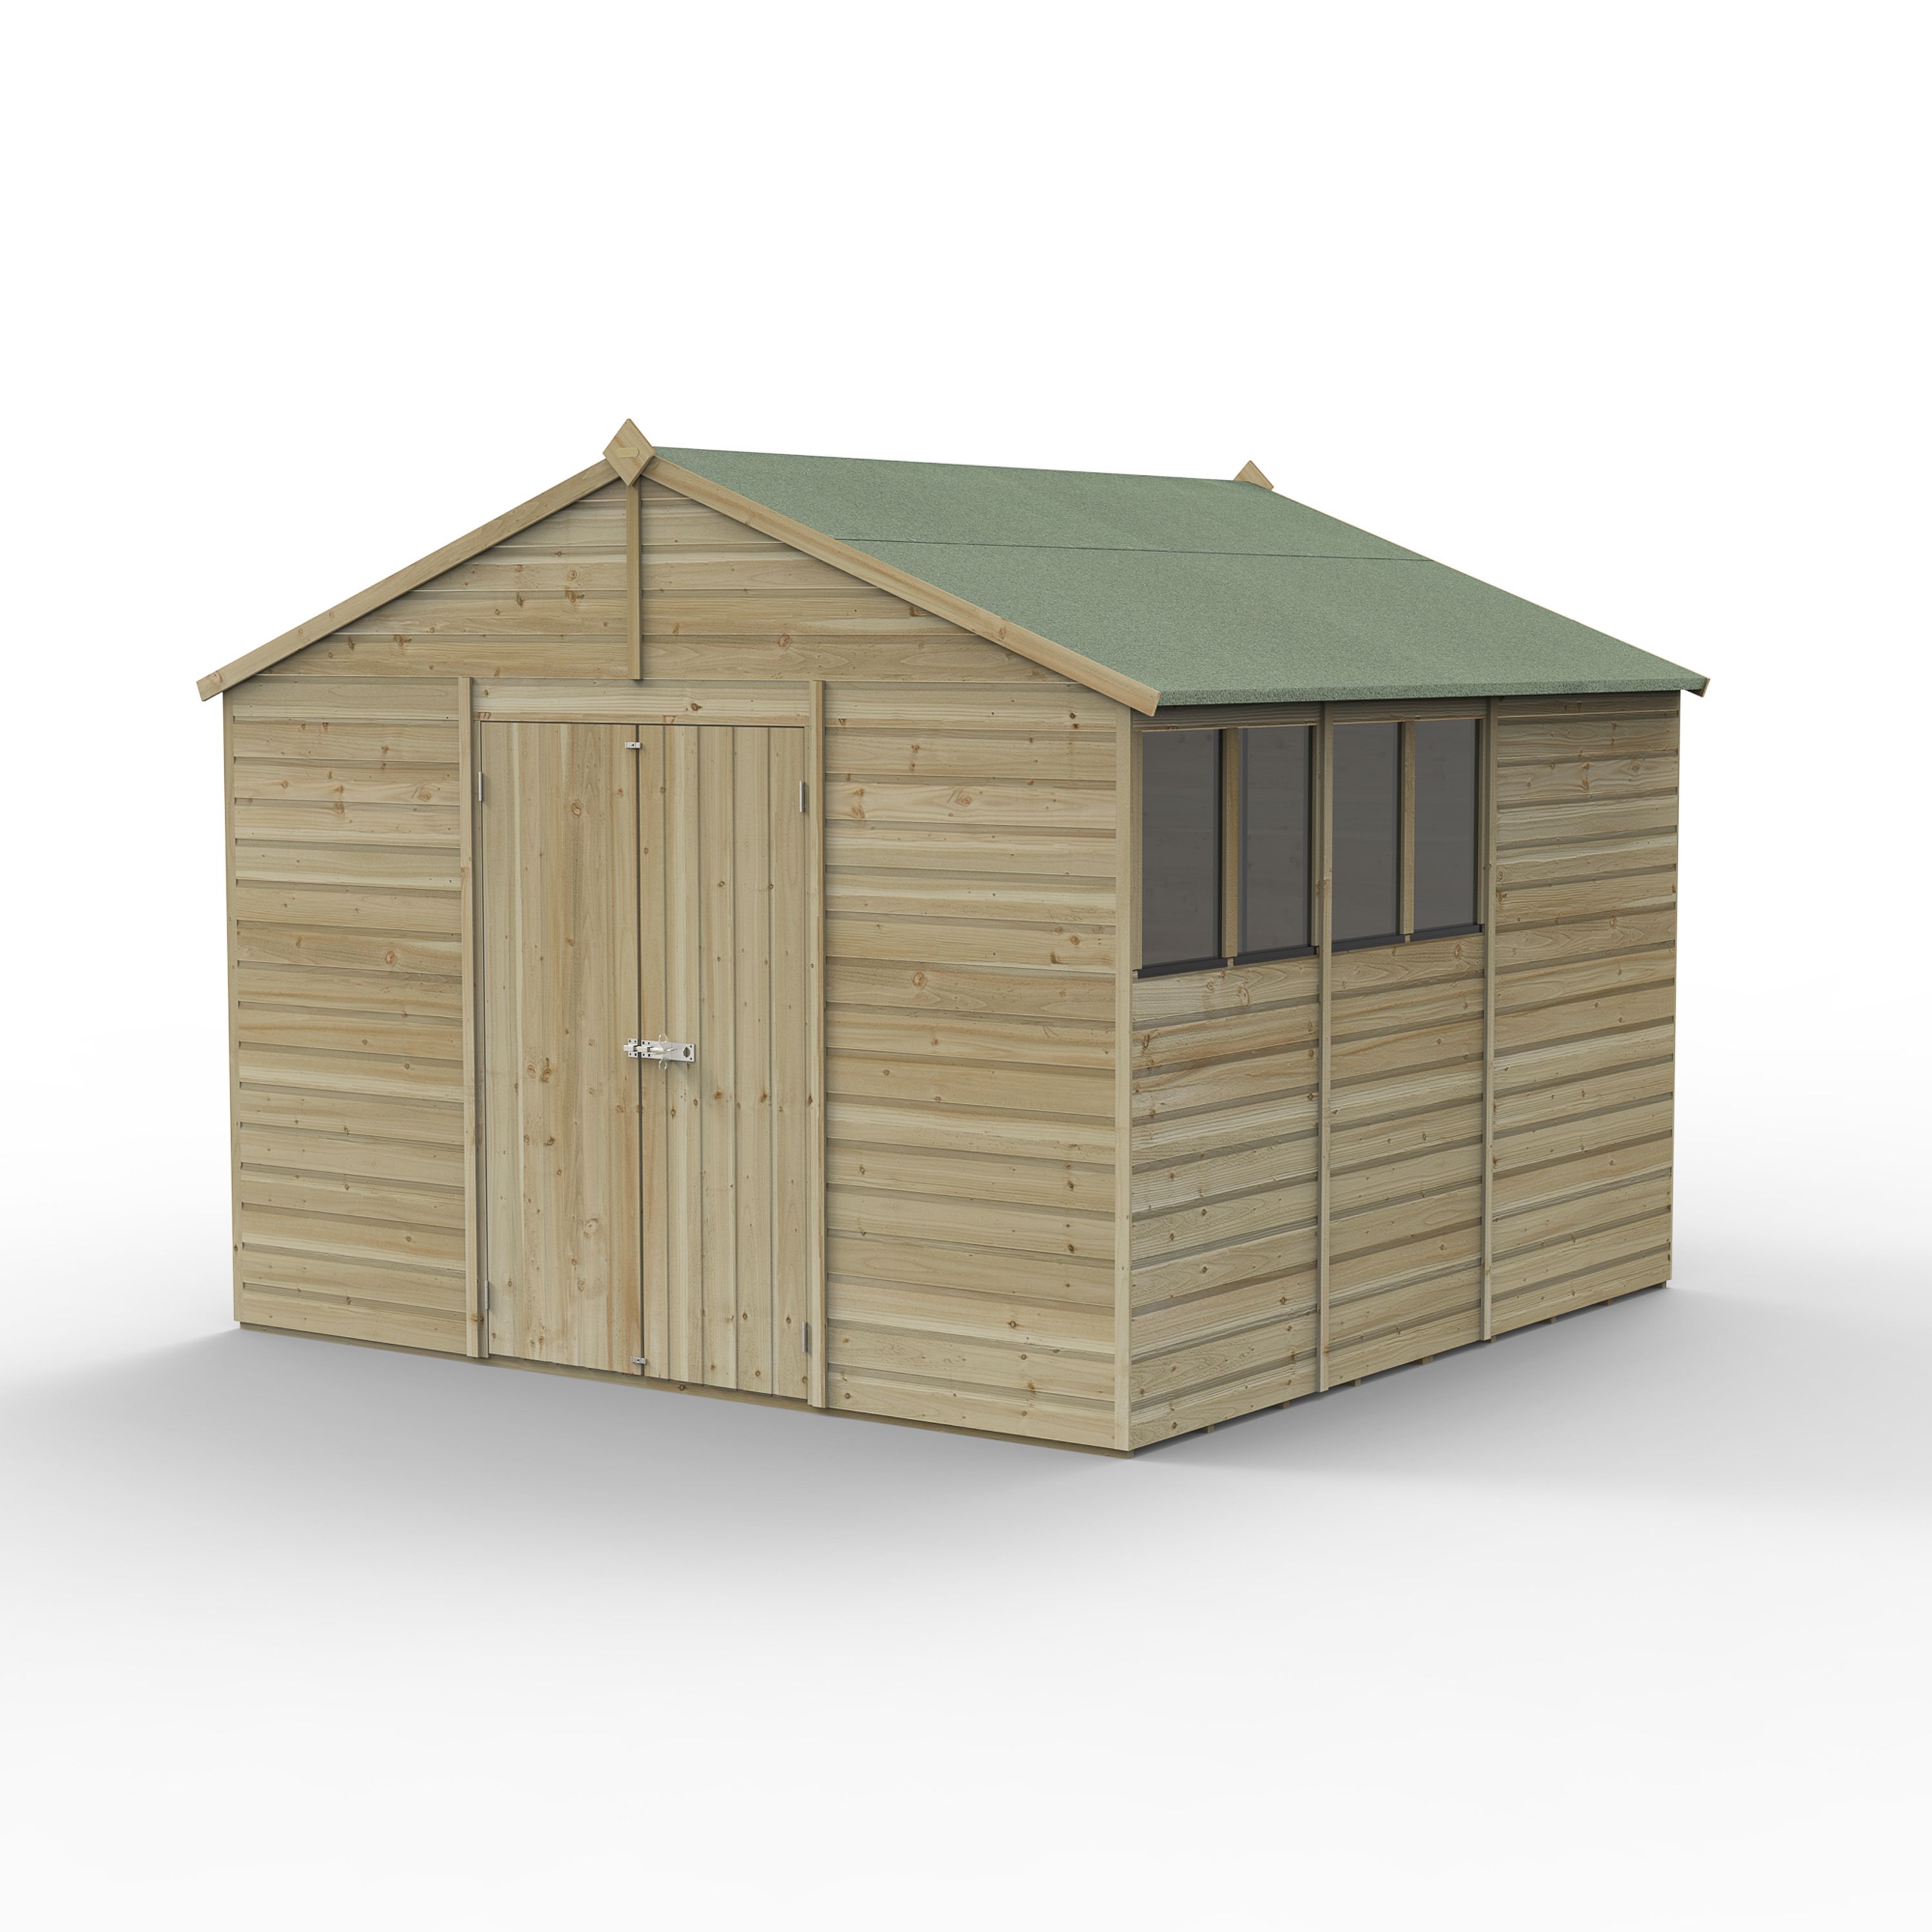 Forest Garden Beckwood 10x10 ft Apex Natural timber Wooden 2 door Shed with floor & 4 windows - Assembly not required